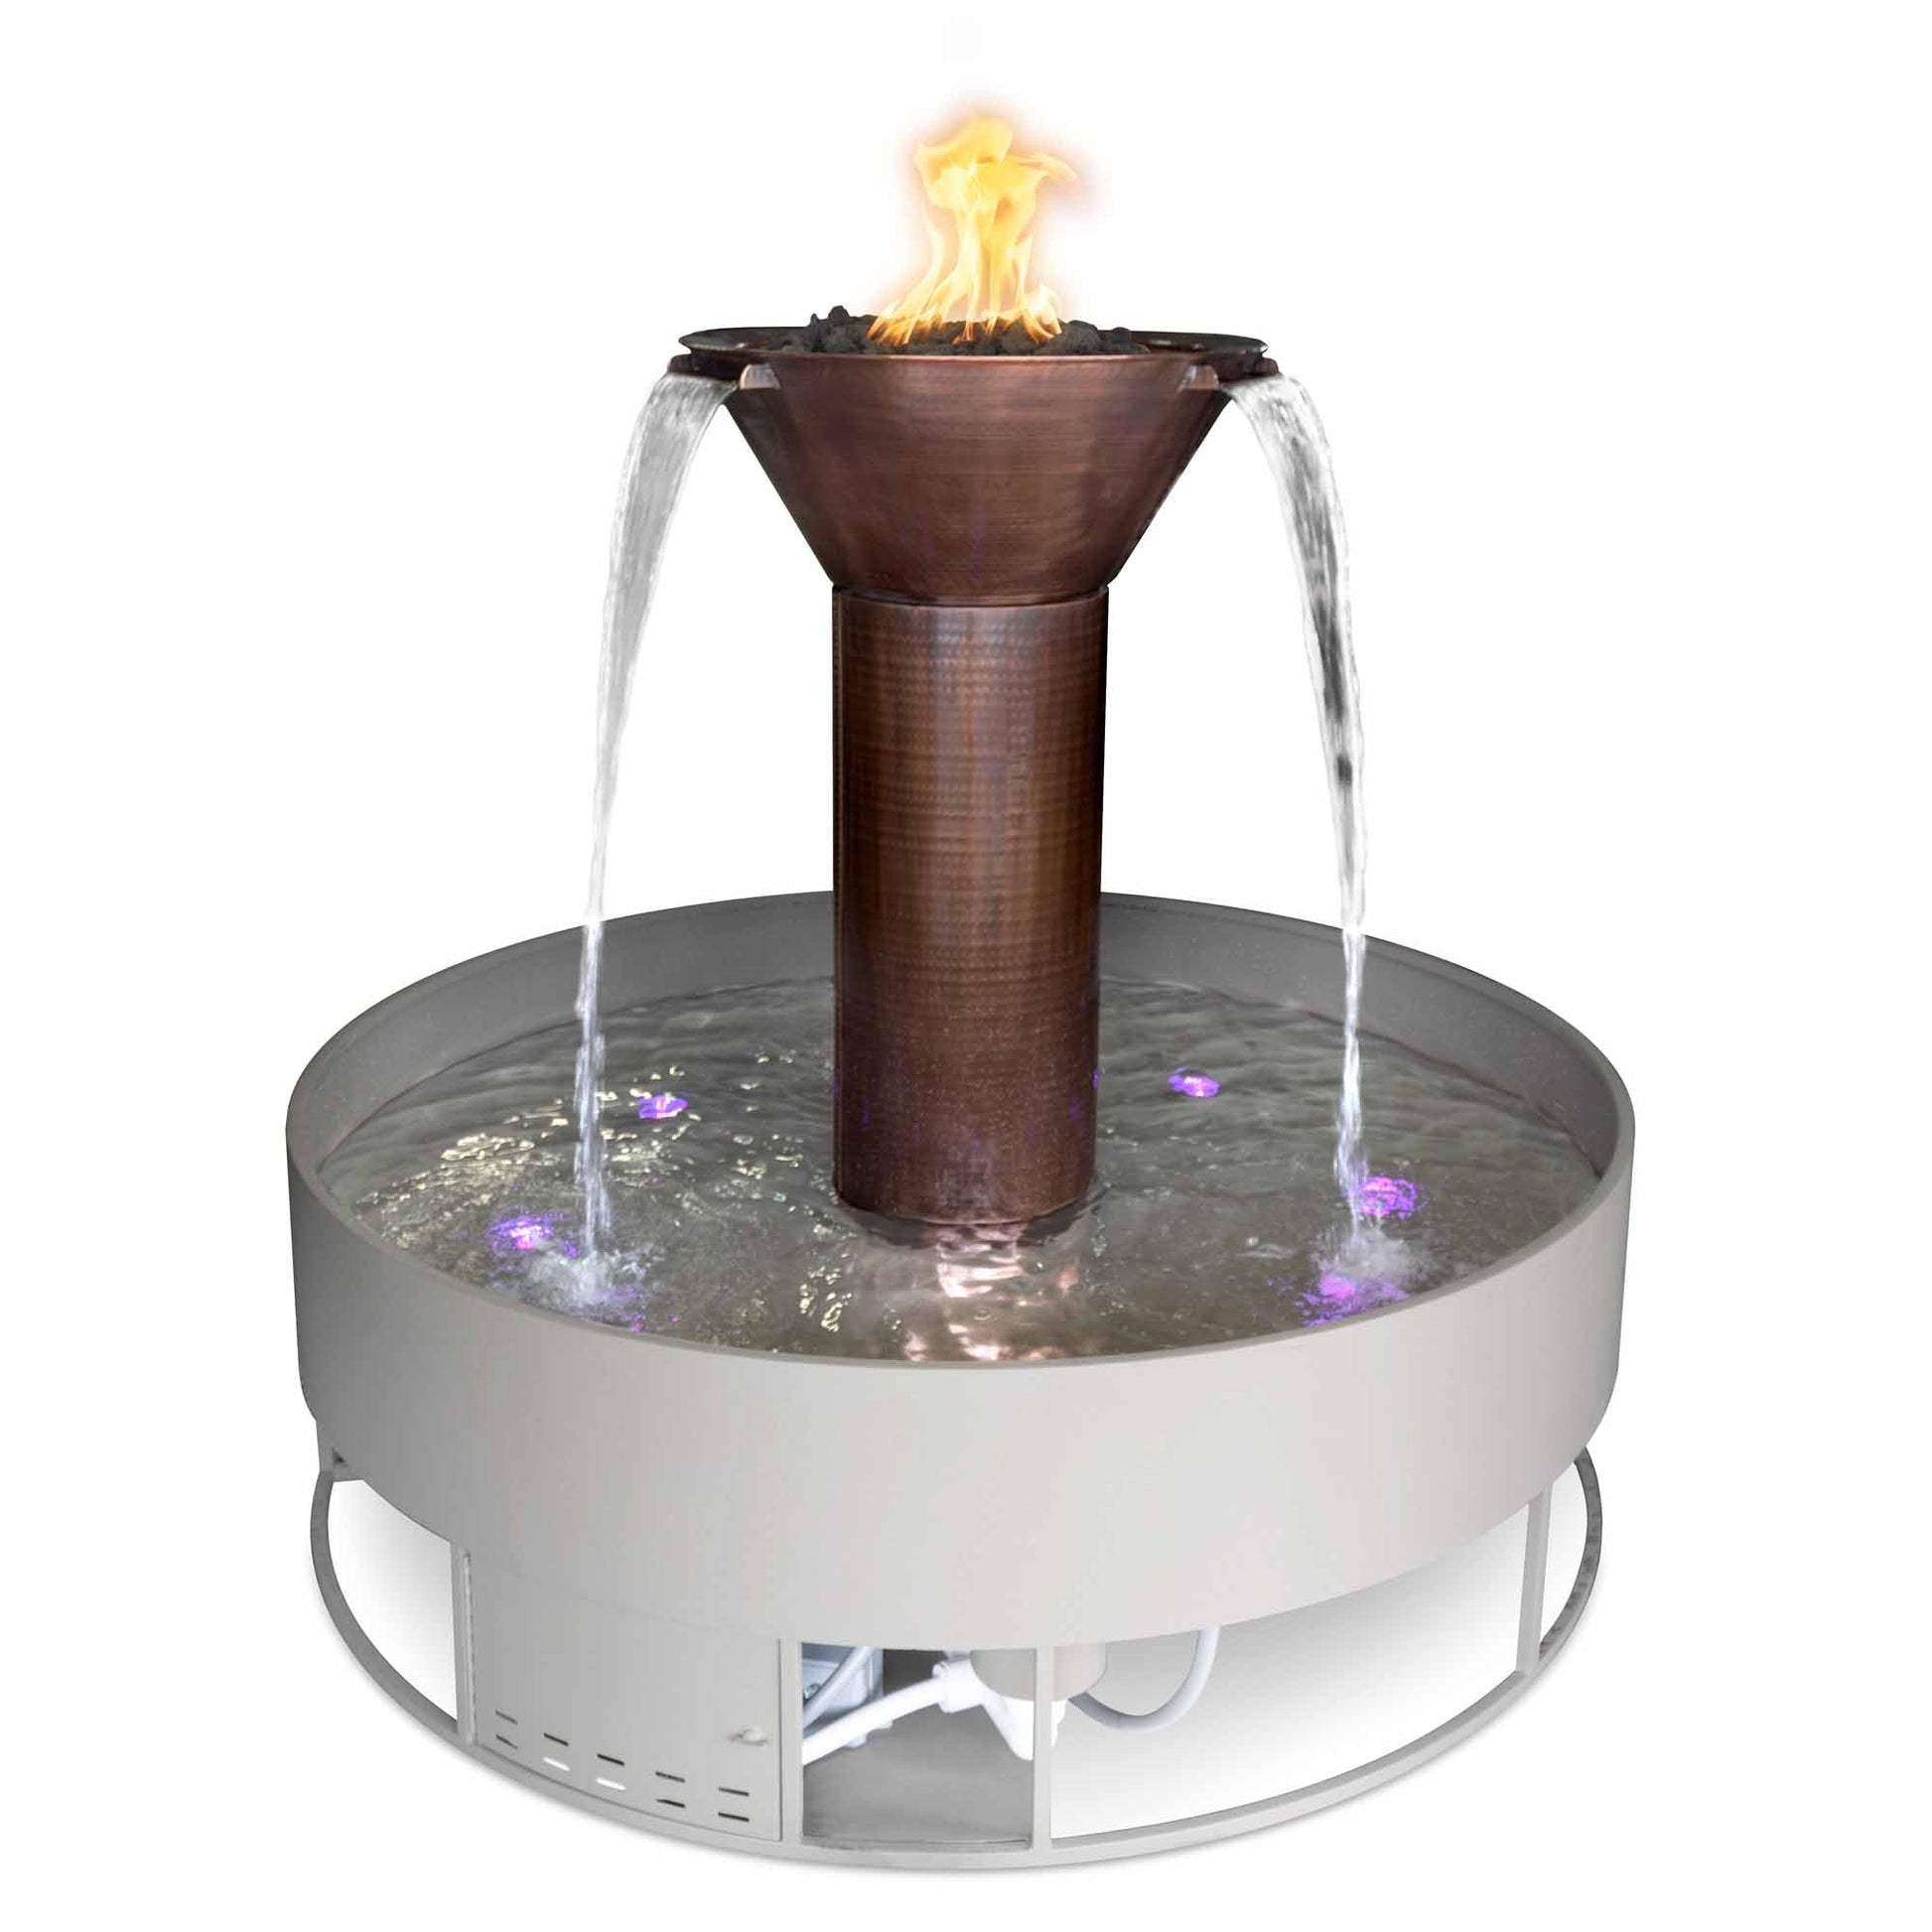 The Outdoor Plus Round Olympian 72" Copper Liquid Propane Fire & Water 3-way Spill Fountain with 12V Electronic Ignition